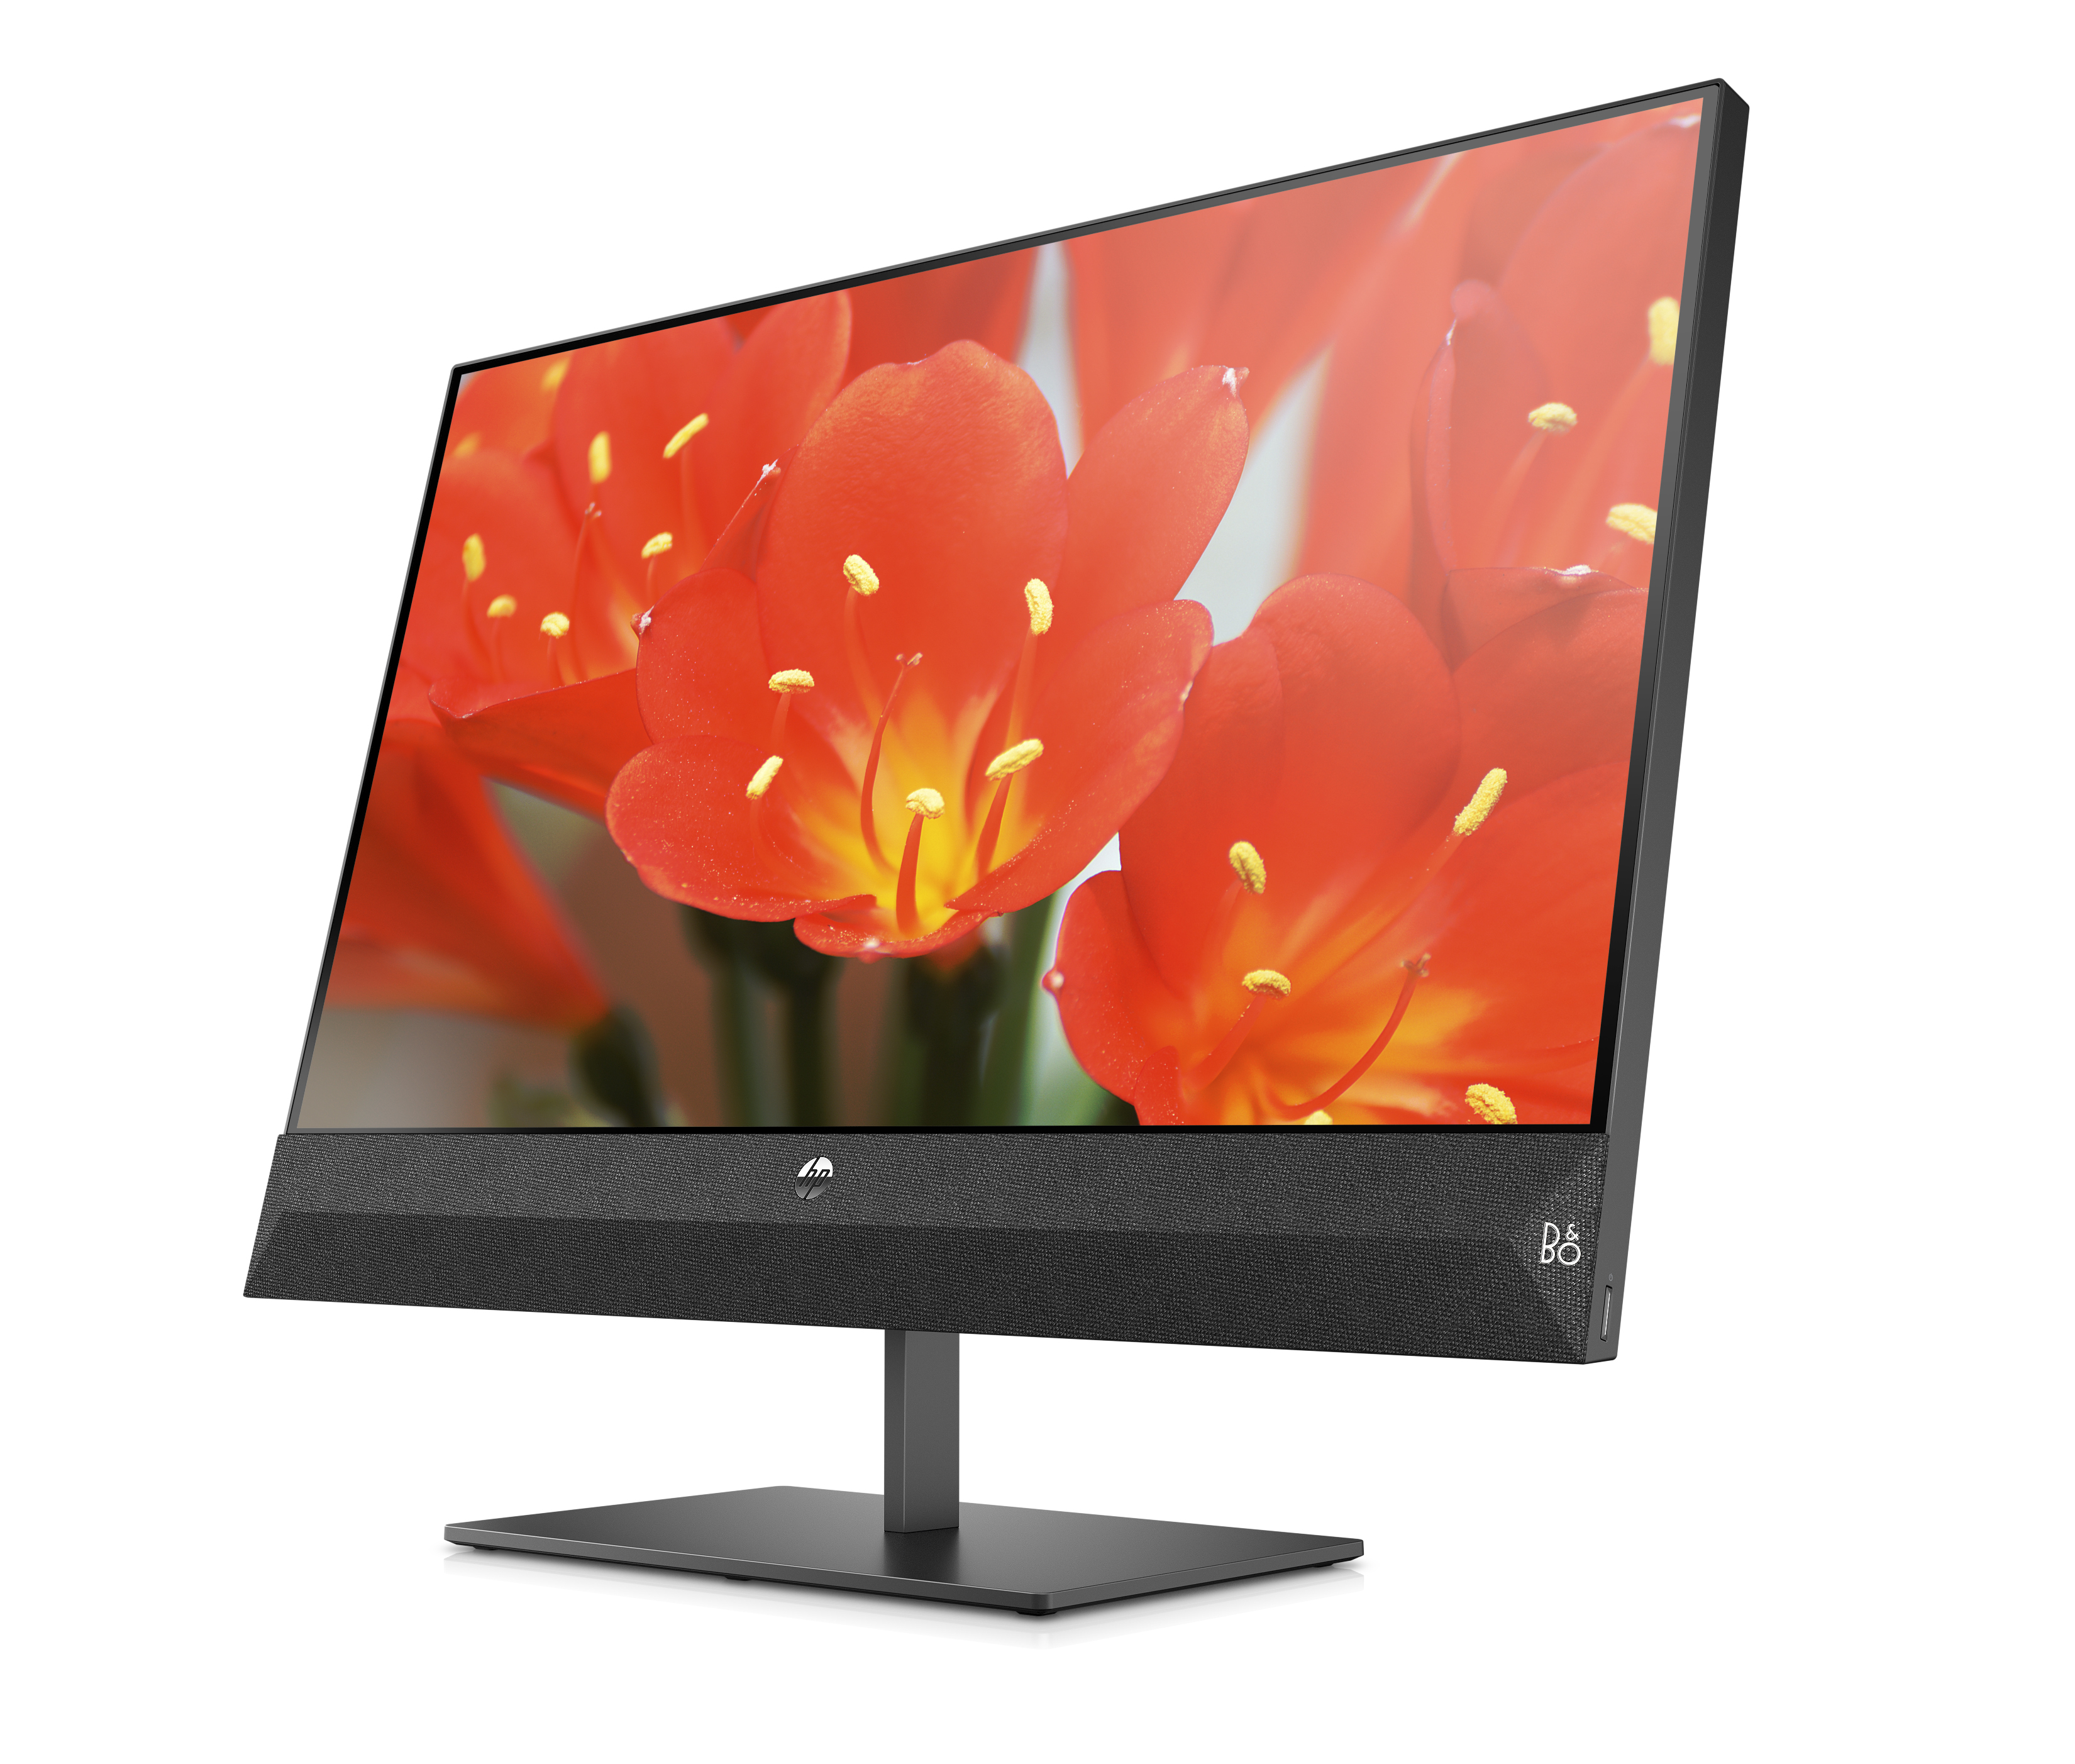 hp launches new monitors and all in one ces 2019 pavilion 27 fhd display frontleft